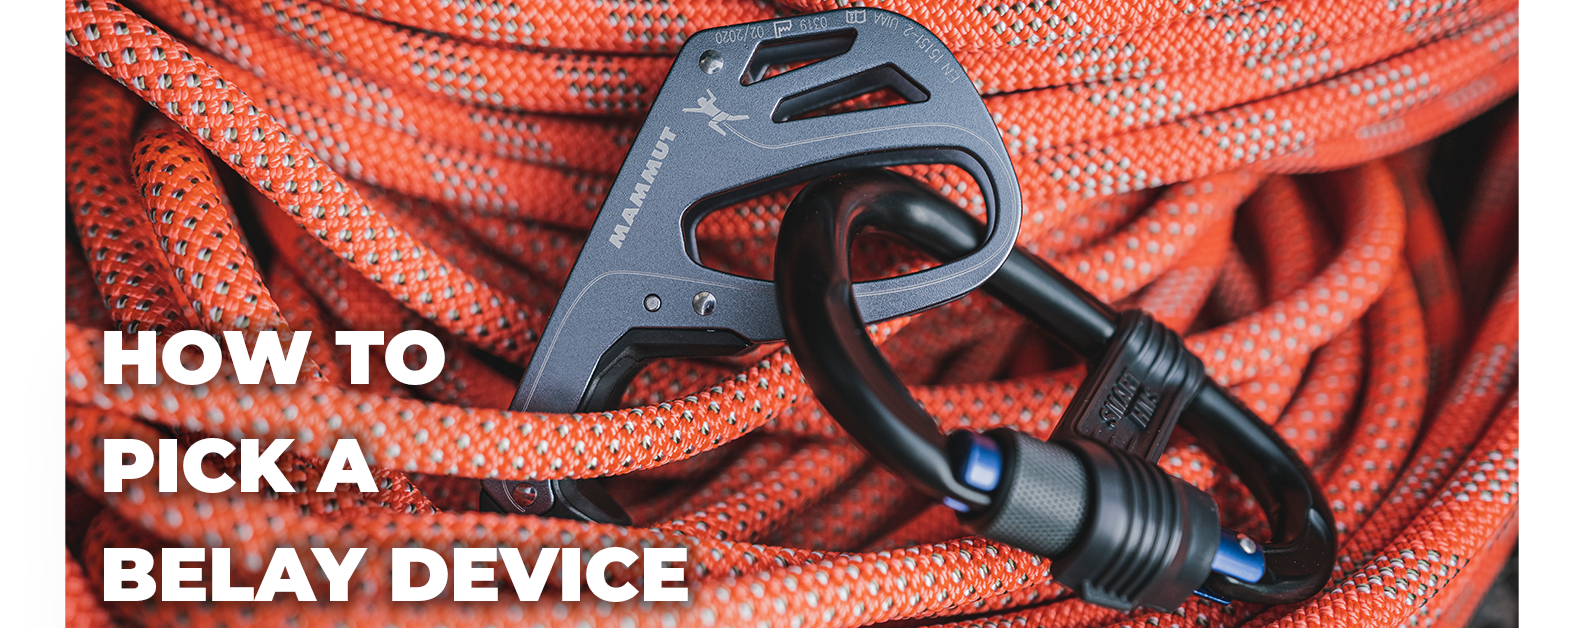 Guide to Buying a Belay Device